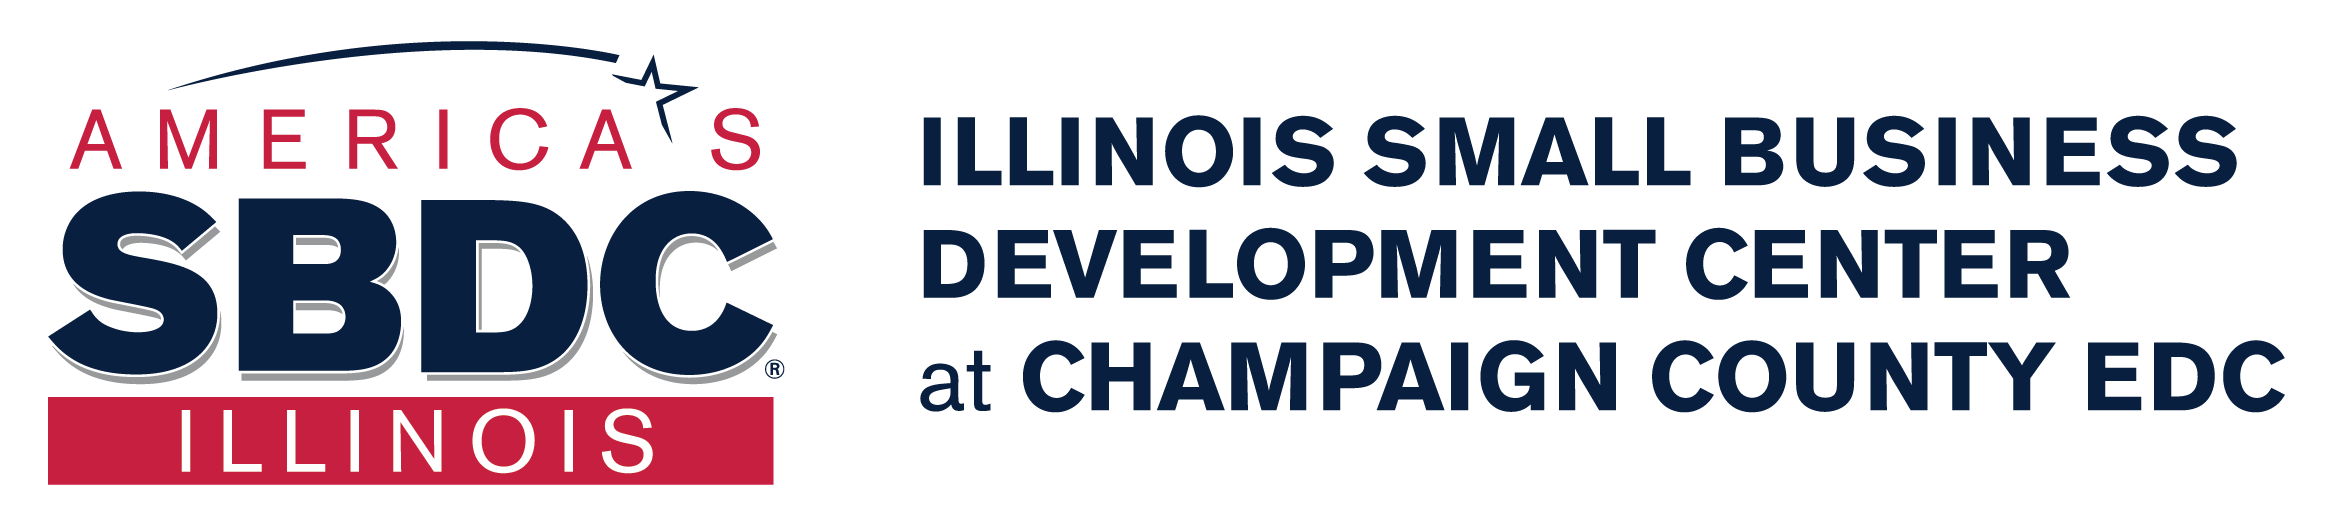 Logo for the Small Business Development Center at Champaign County EDC.